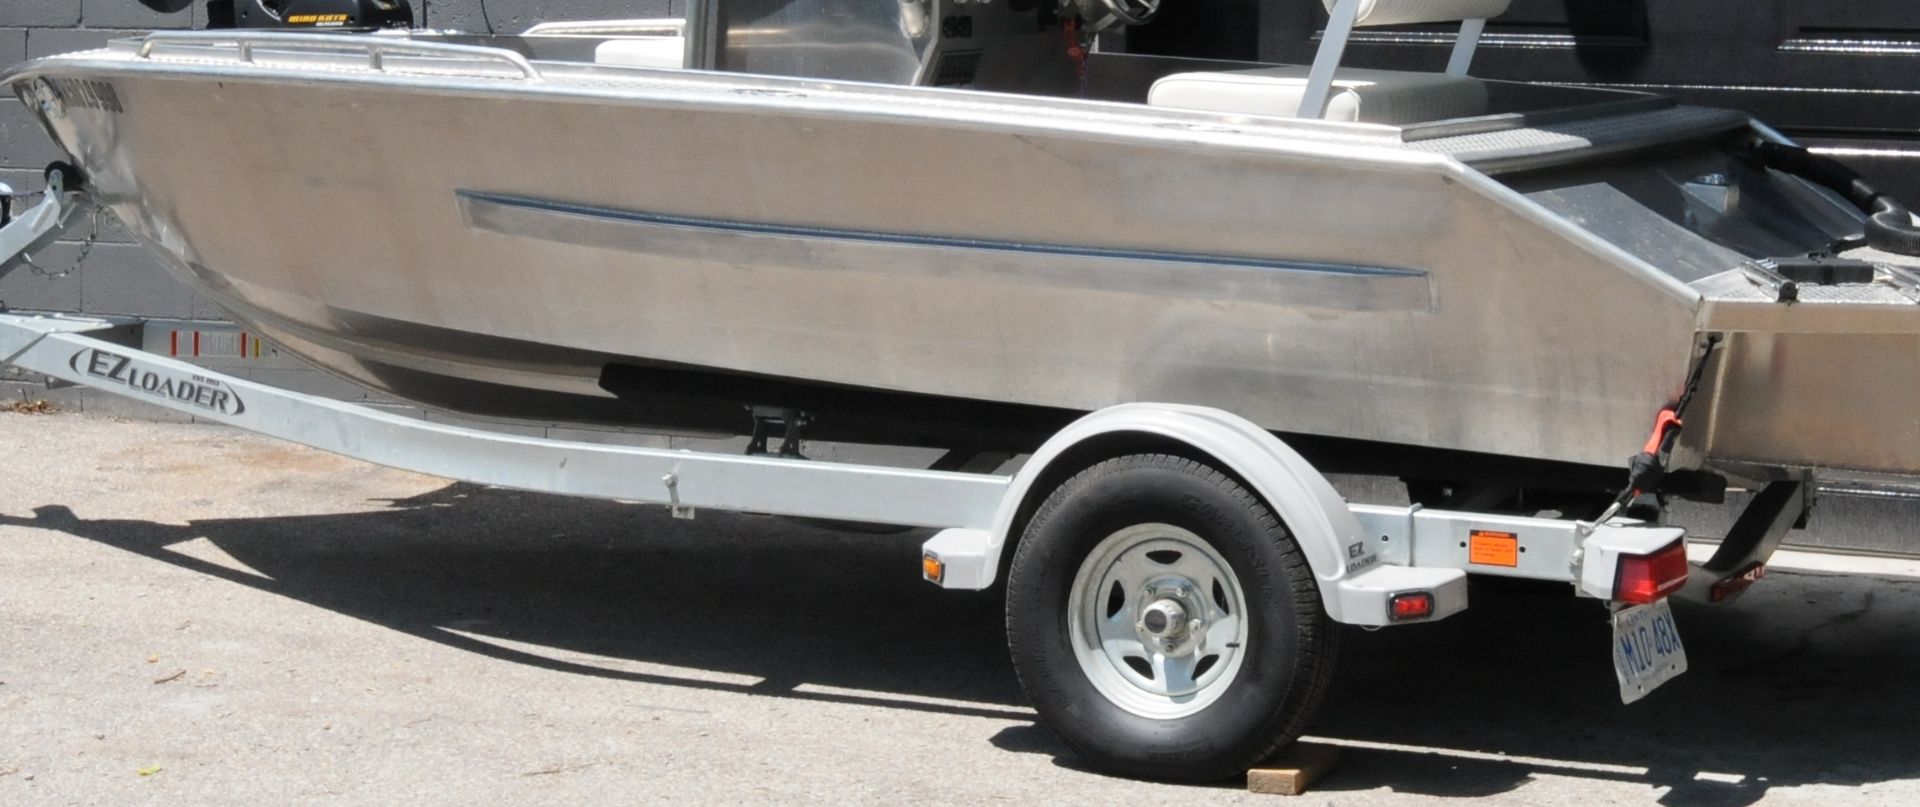 BAYVIEW BOATS (2013) PROFISHER 16 CENTER CONSOLE ALUMINUM FISHING BOAT ALL WELDED CONSTRUCTION - Image 21 of 21